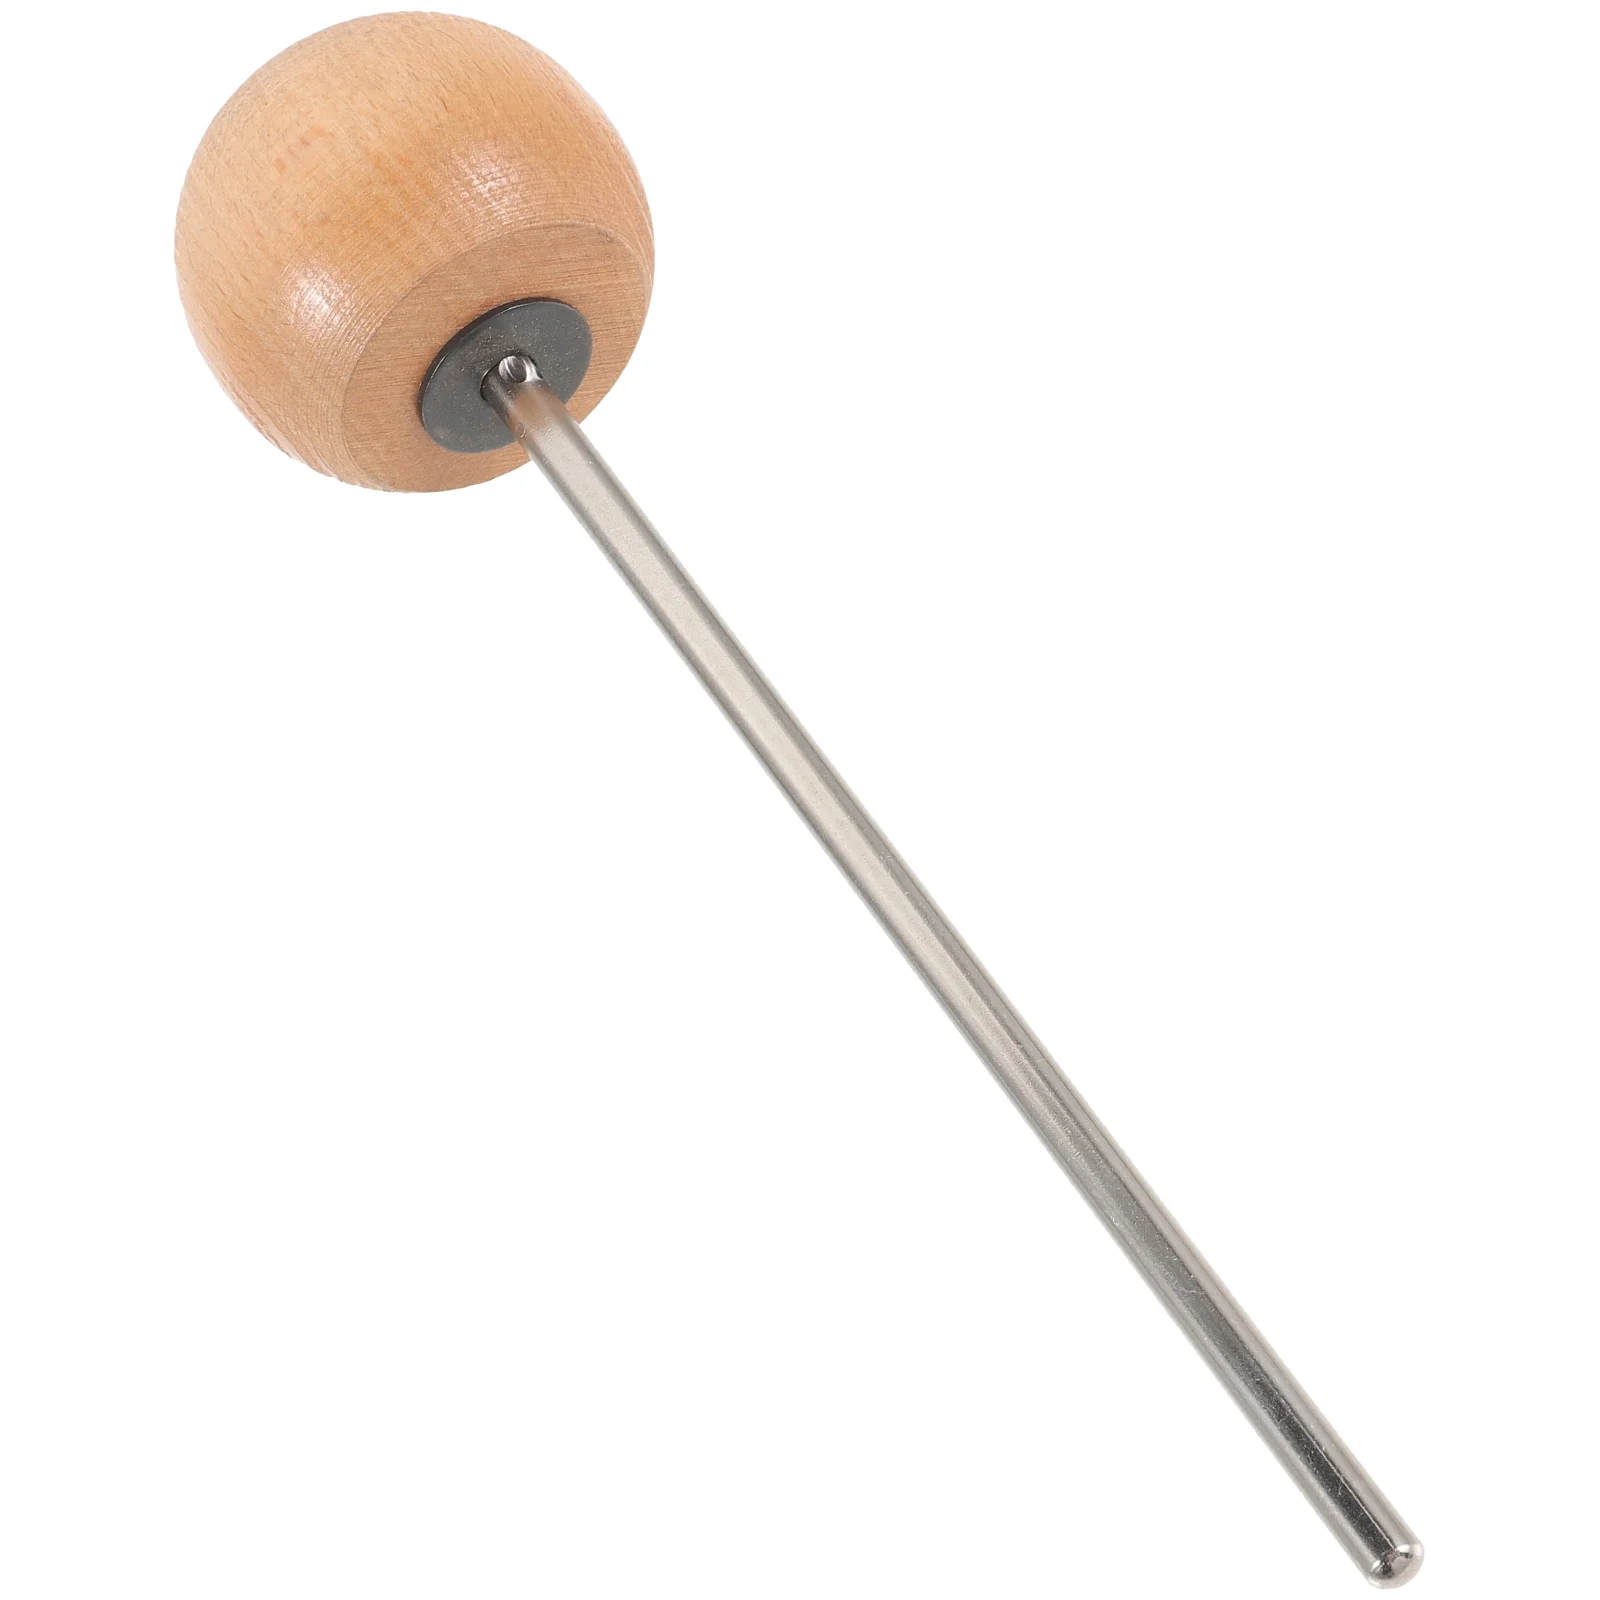 

Wood Bass Drum Practical Drum Drum Kick Mallet Percussion Instrument Accessory Replacement